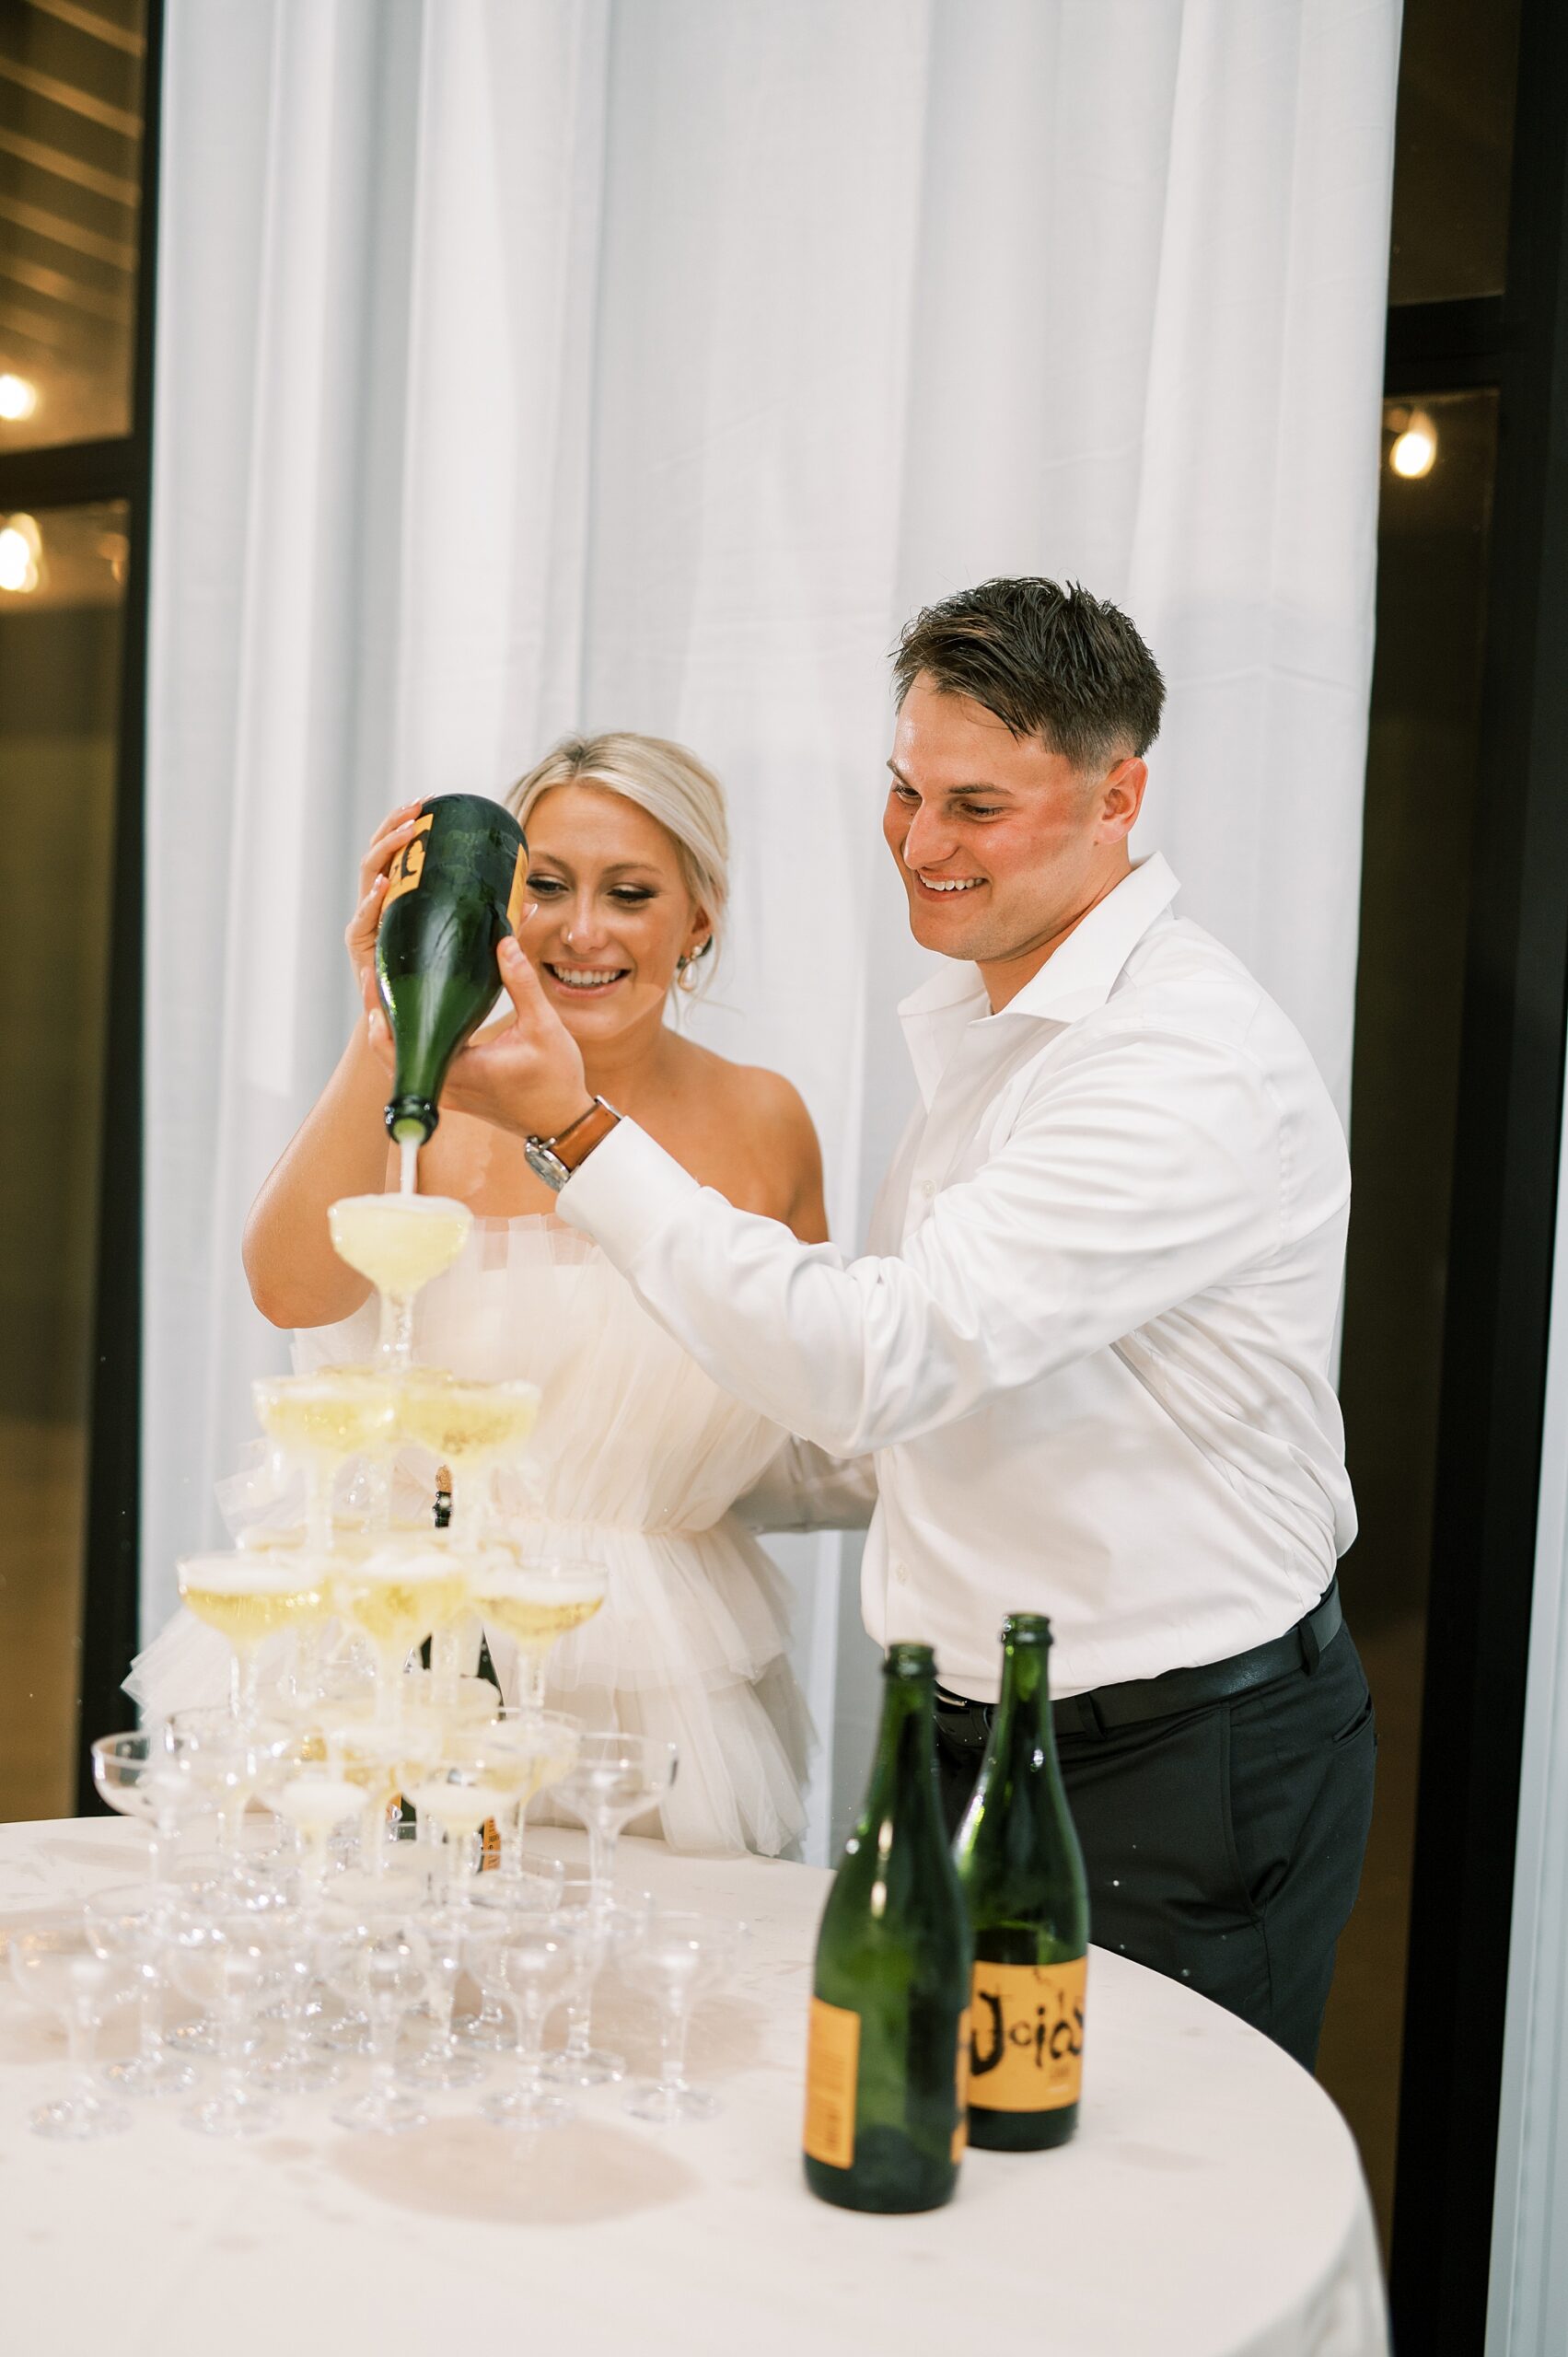 newlyweds pour champagne over tower of glasses